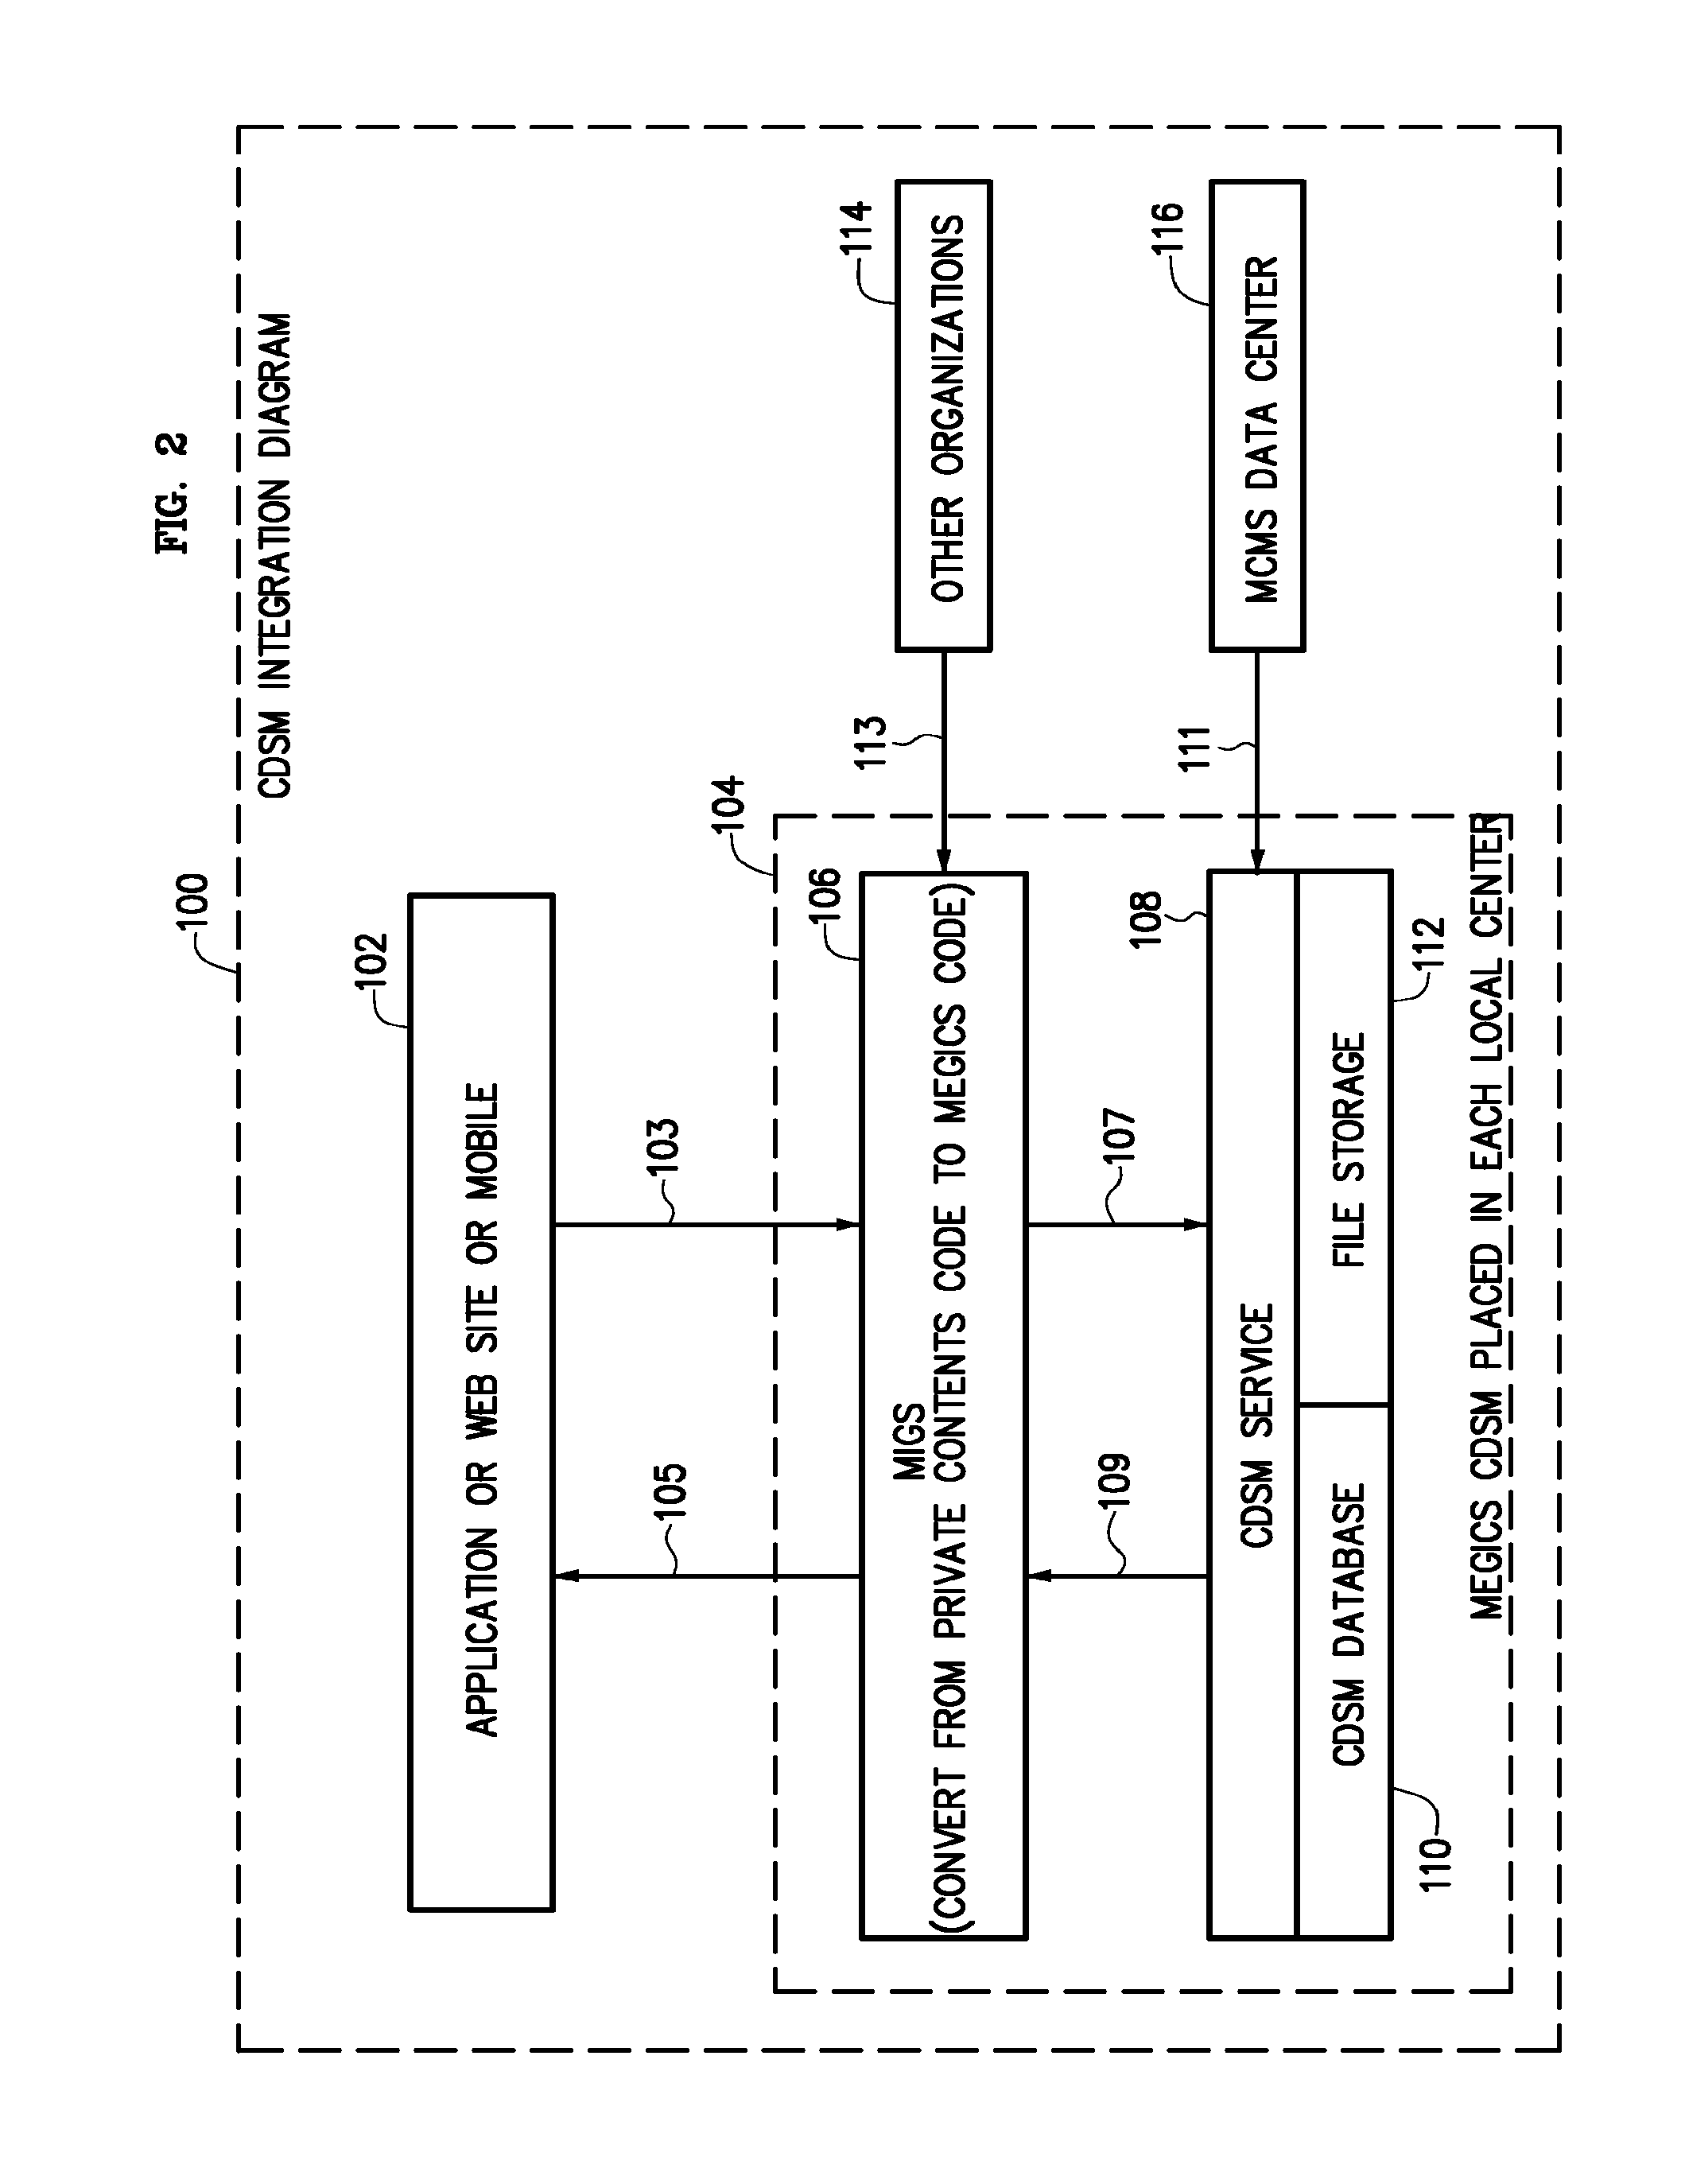 Clinical descision support (CDS) system and method for real time interfacing with medical information management systems of medical service providers